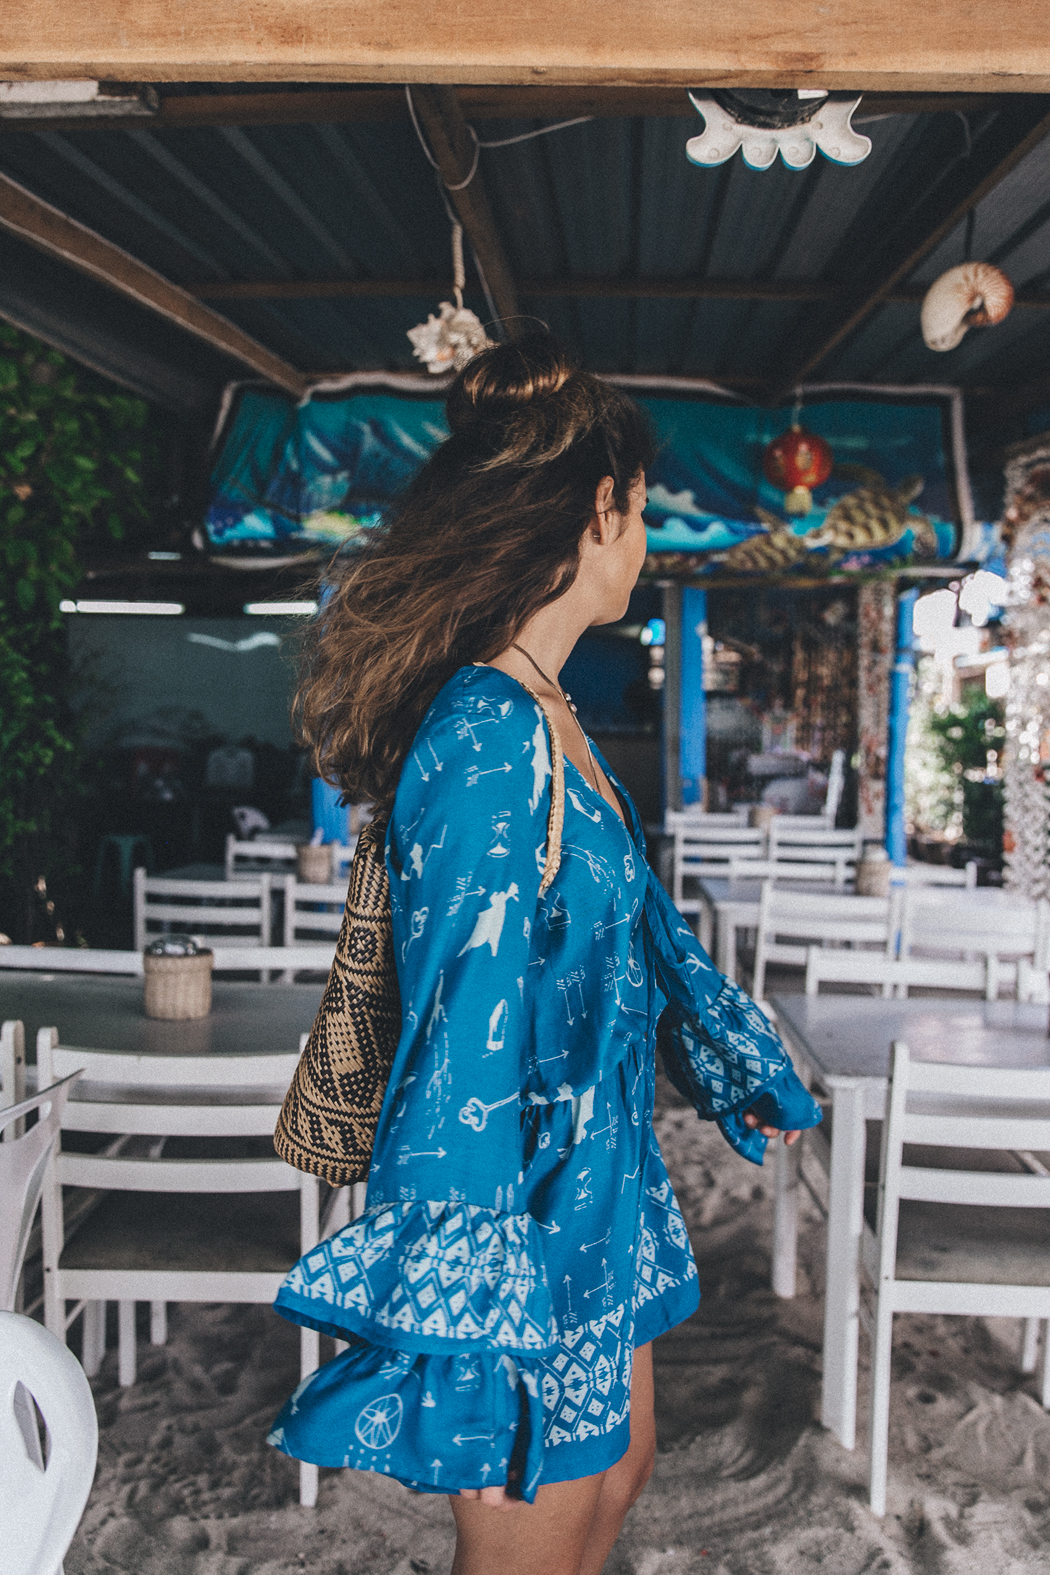 Bohemian_Bones_Dress-Revolve_Clothing-Layering_Necklace-Backpack-Thailand-Phi_Phi_Island-Summer_Look-Outfit-Beach-18